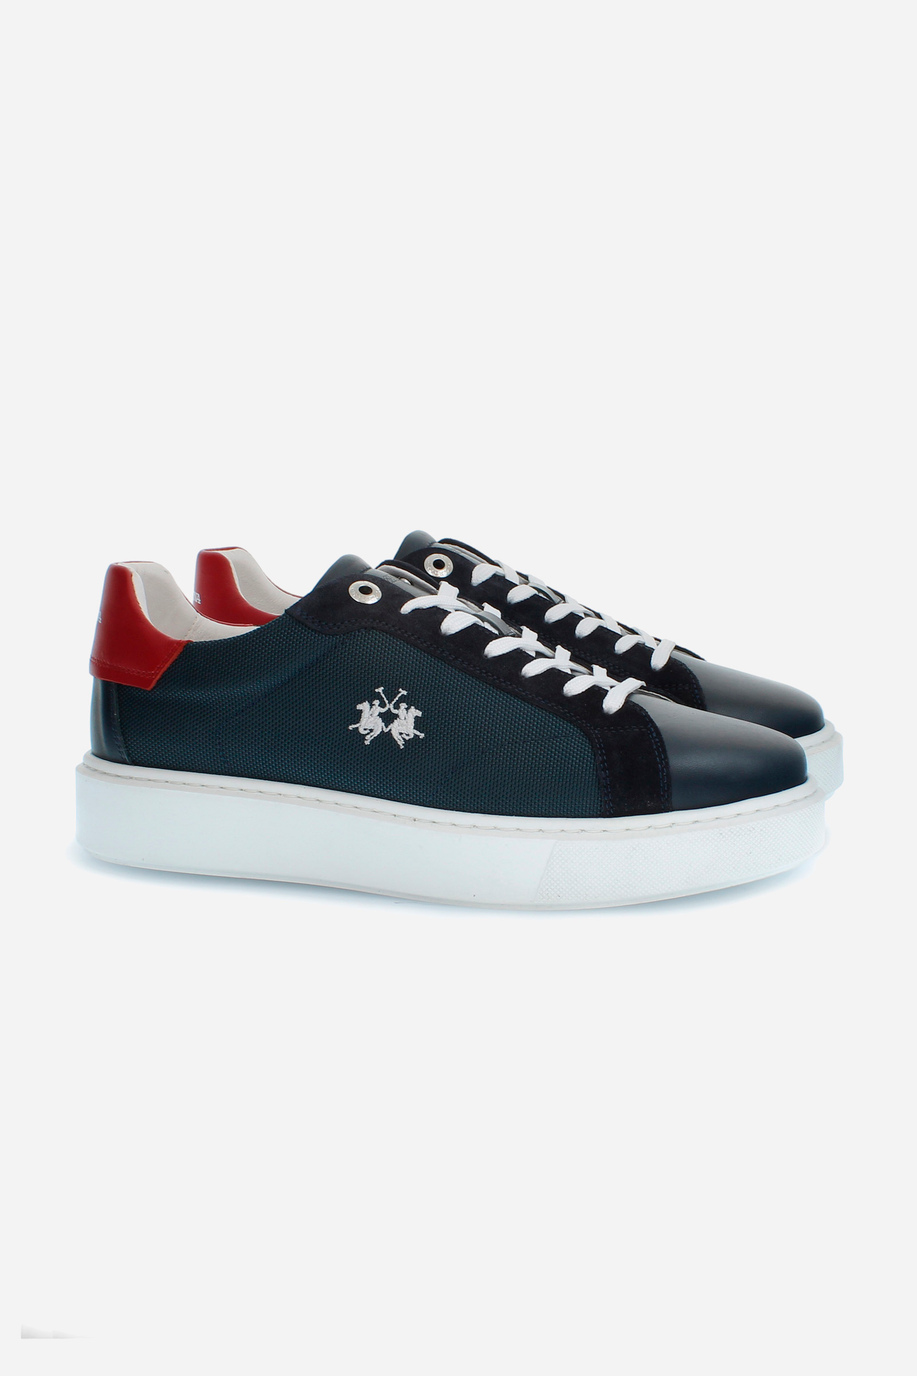 Men's trainers in leather and suede - Man shoes | La Martina - Official Online Shop